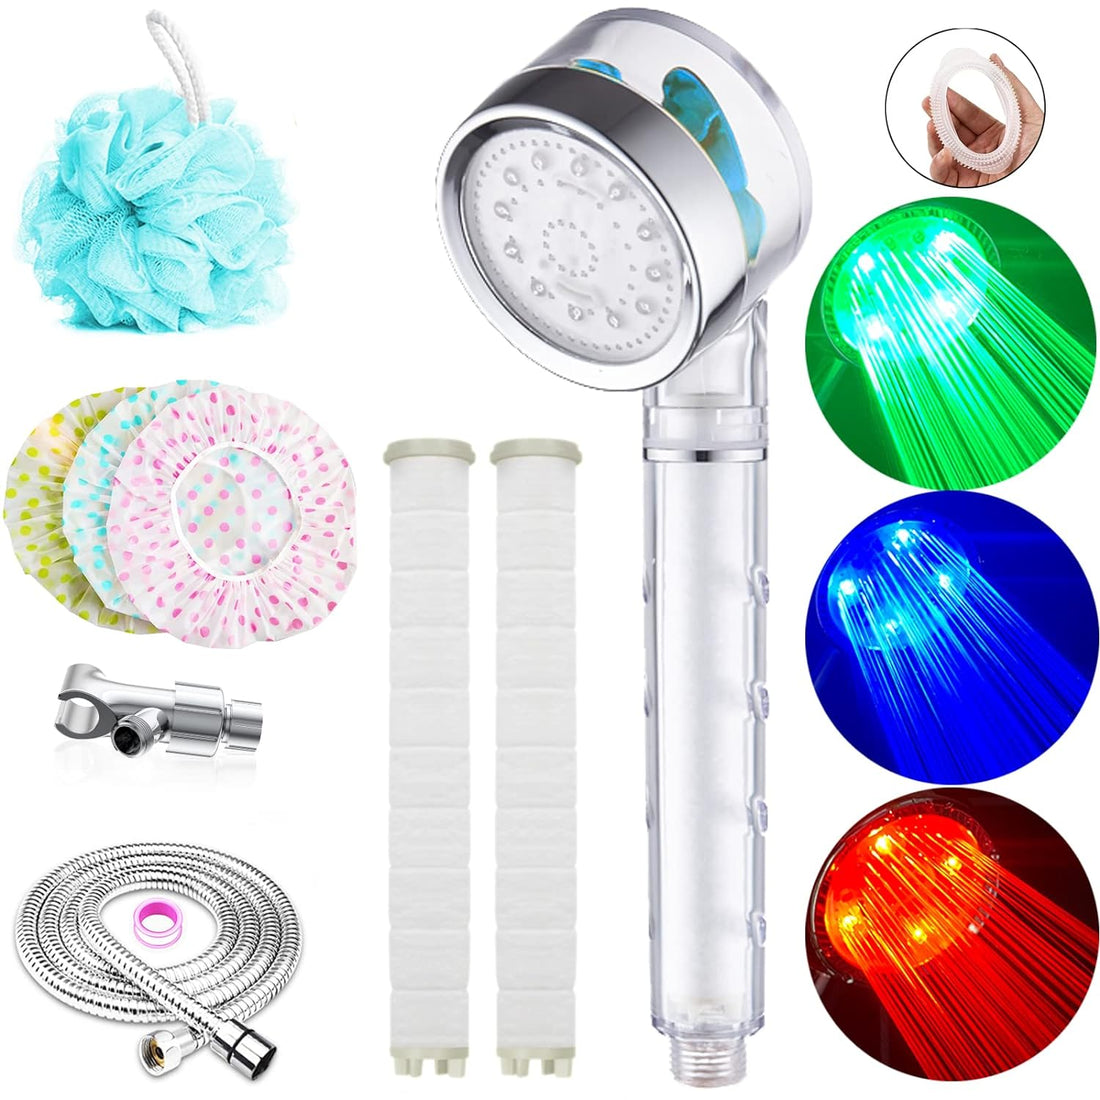 Led Shower Head 3 Color Light Change Automatically Handheld Showerhead PP-Cotton Filter Turbo Propeller Driven Shower Head set, Water Saving Filtered Shower Head for Dry Skin& Hair